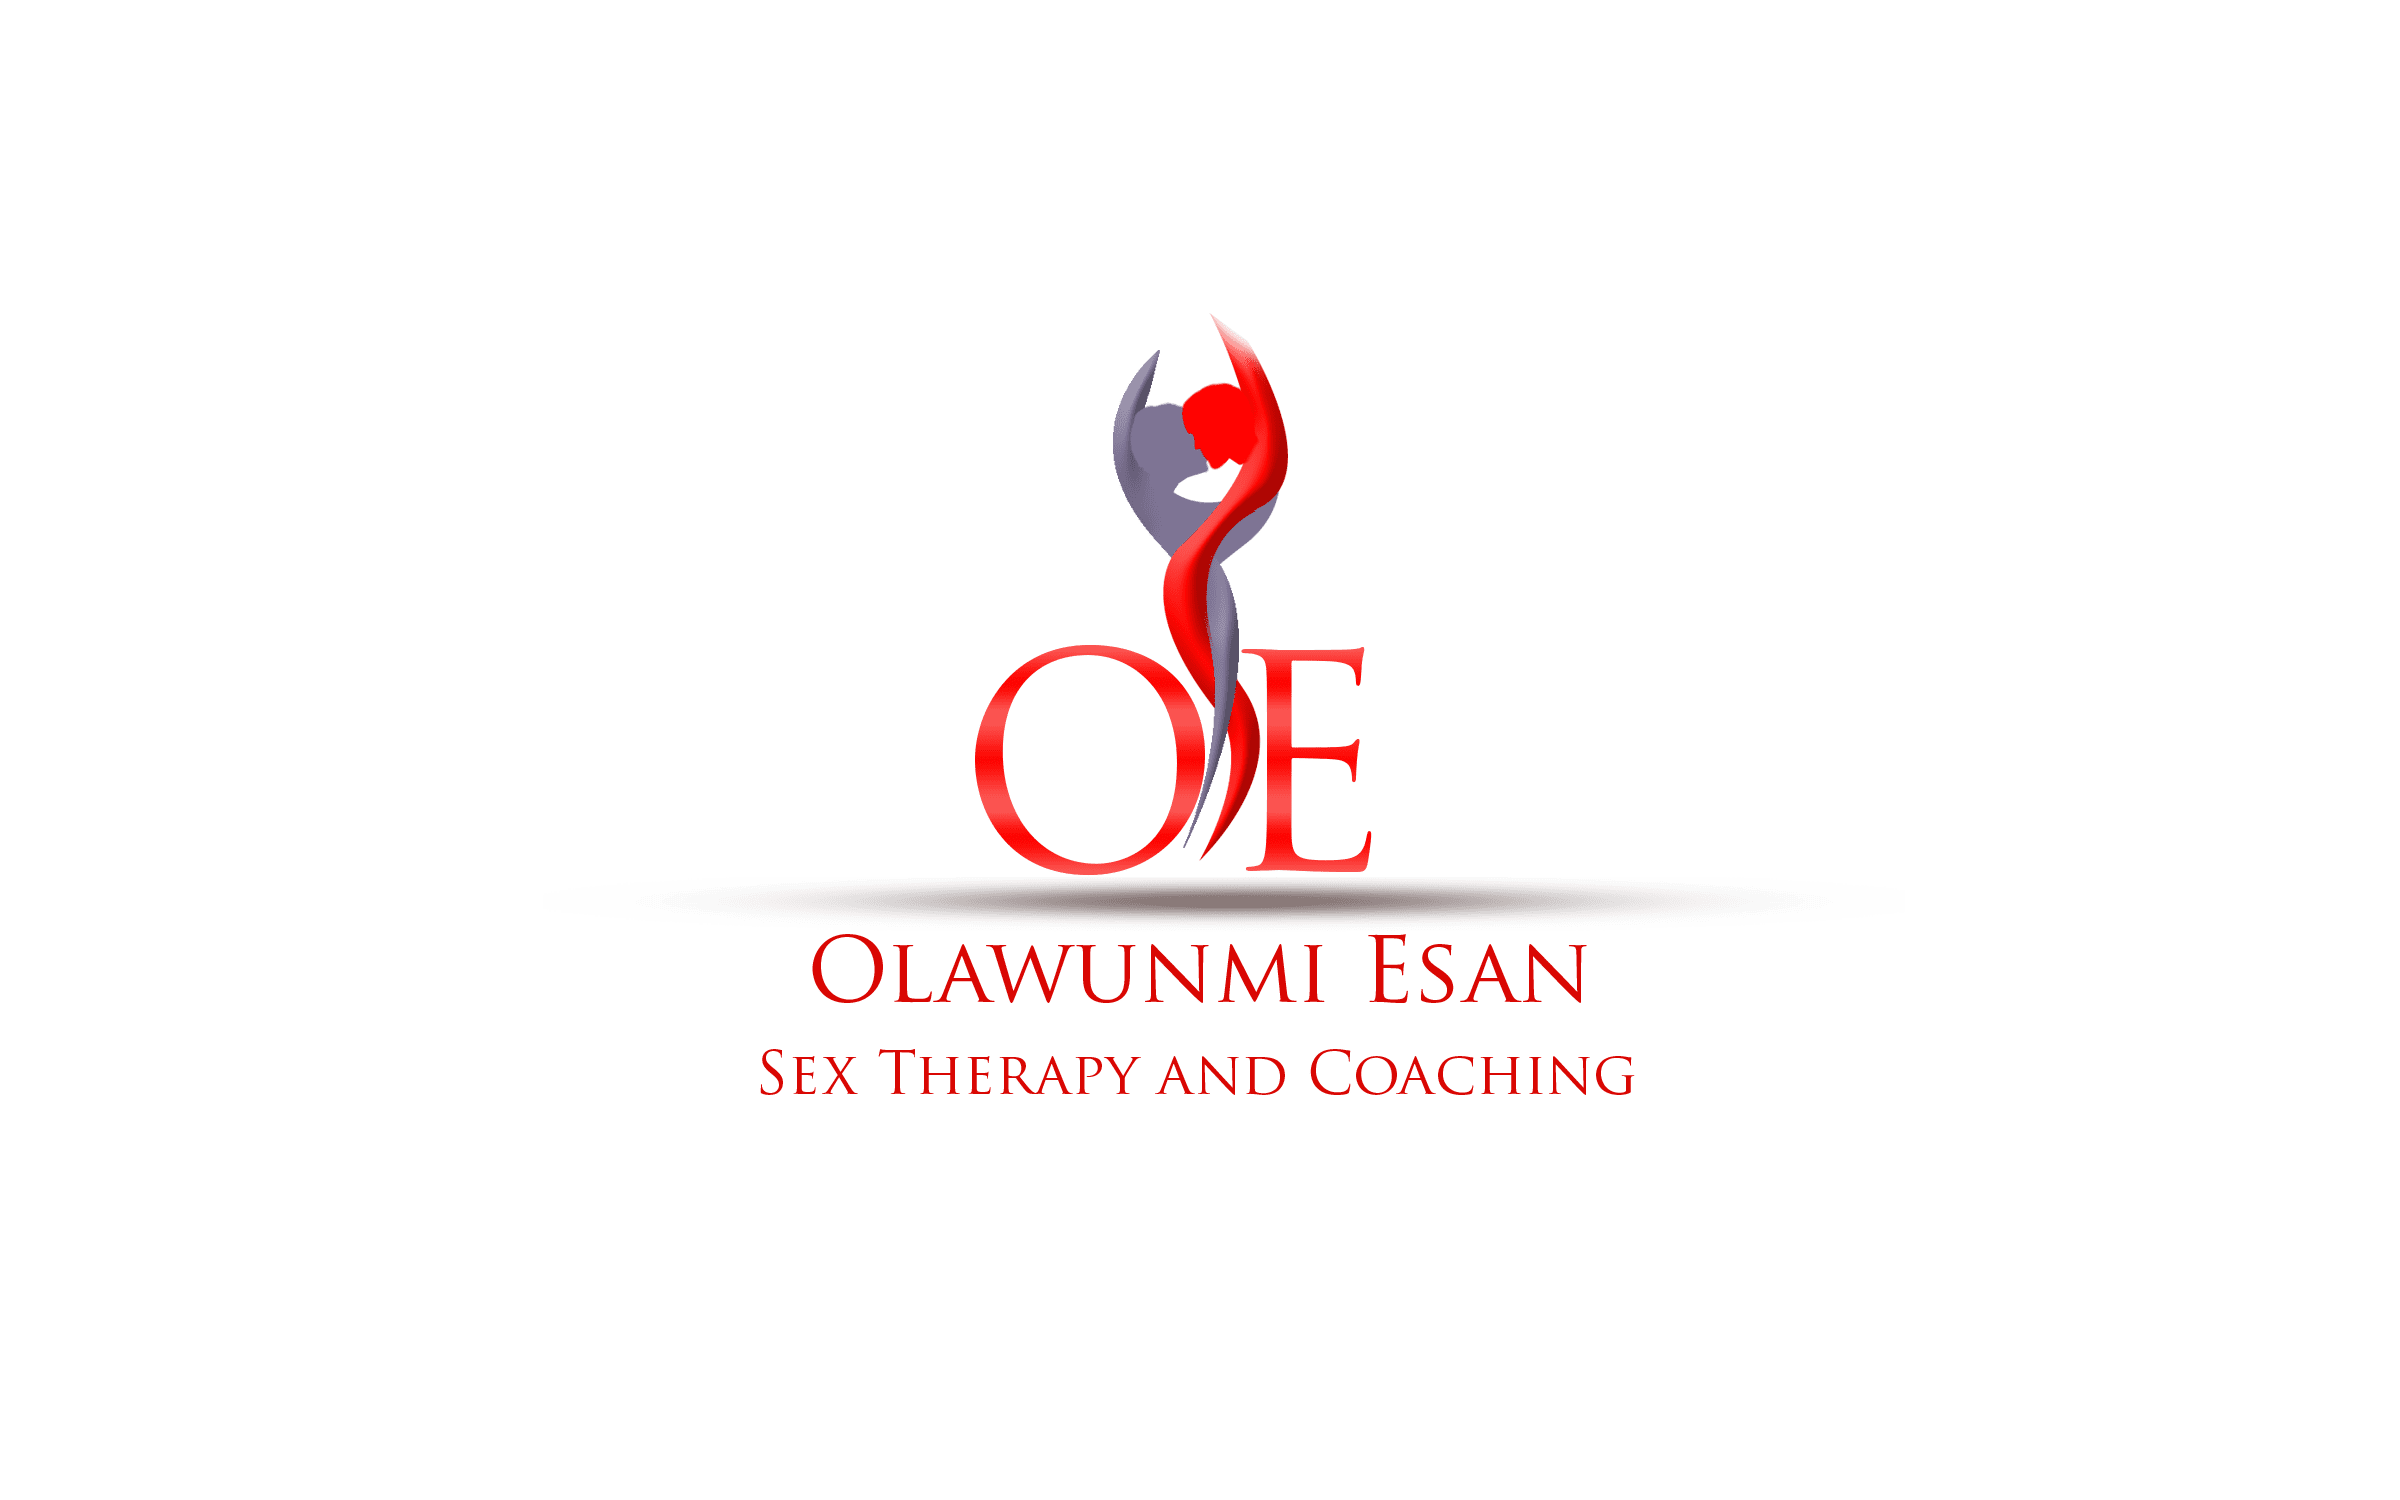 Sex Therapist and Coach | Sex Marriage Counseling | Relationship Counselling | Sexual Dysfunction | Couples Sex counselling | Sex therapy courses online | Sex Toys | Sex Therapist in Lagos – Olawunmi Esan